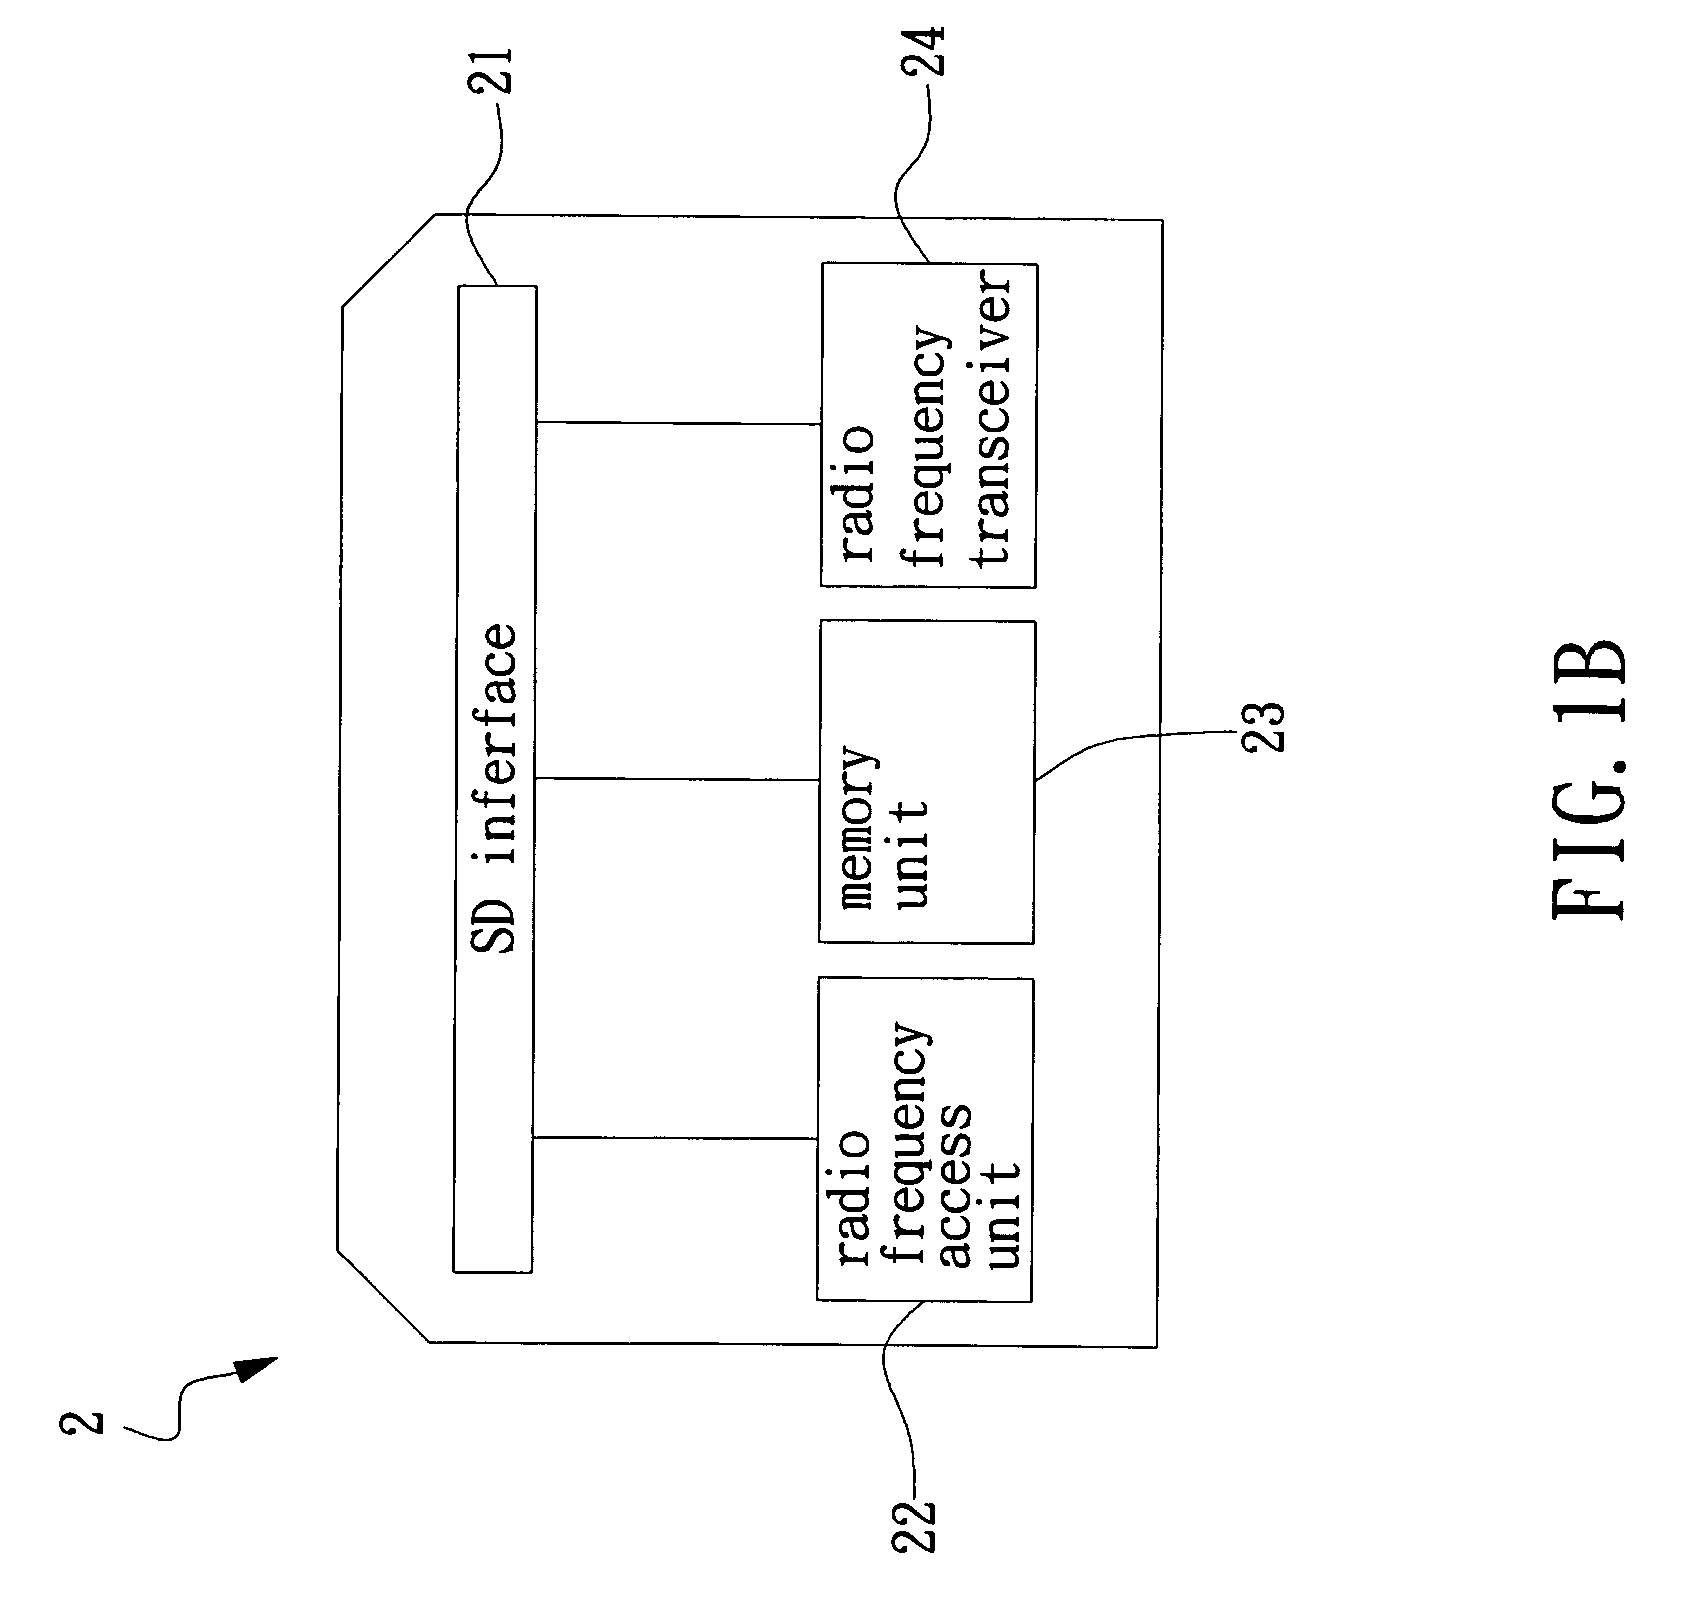 RFID access apparatus and a transaction method using the same